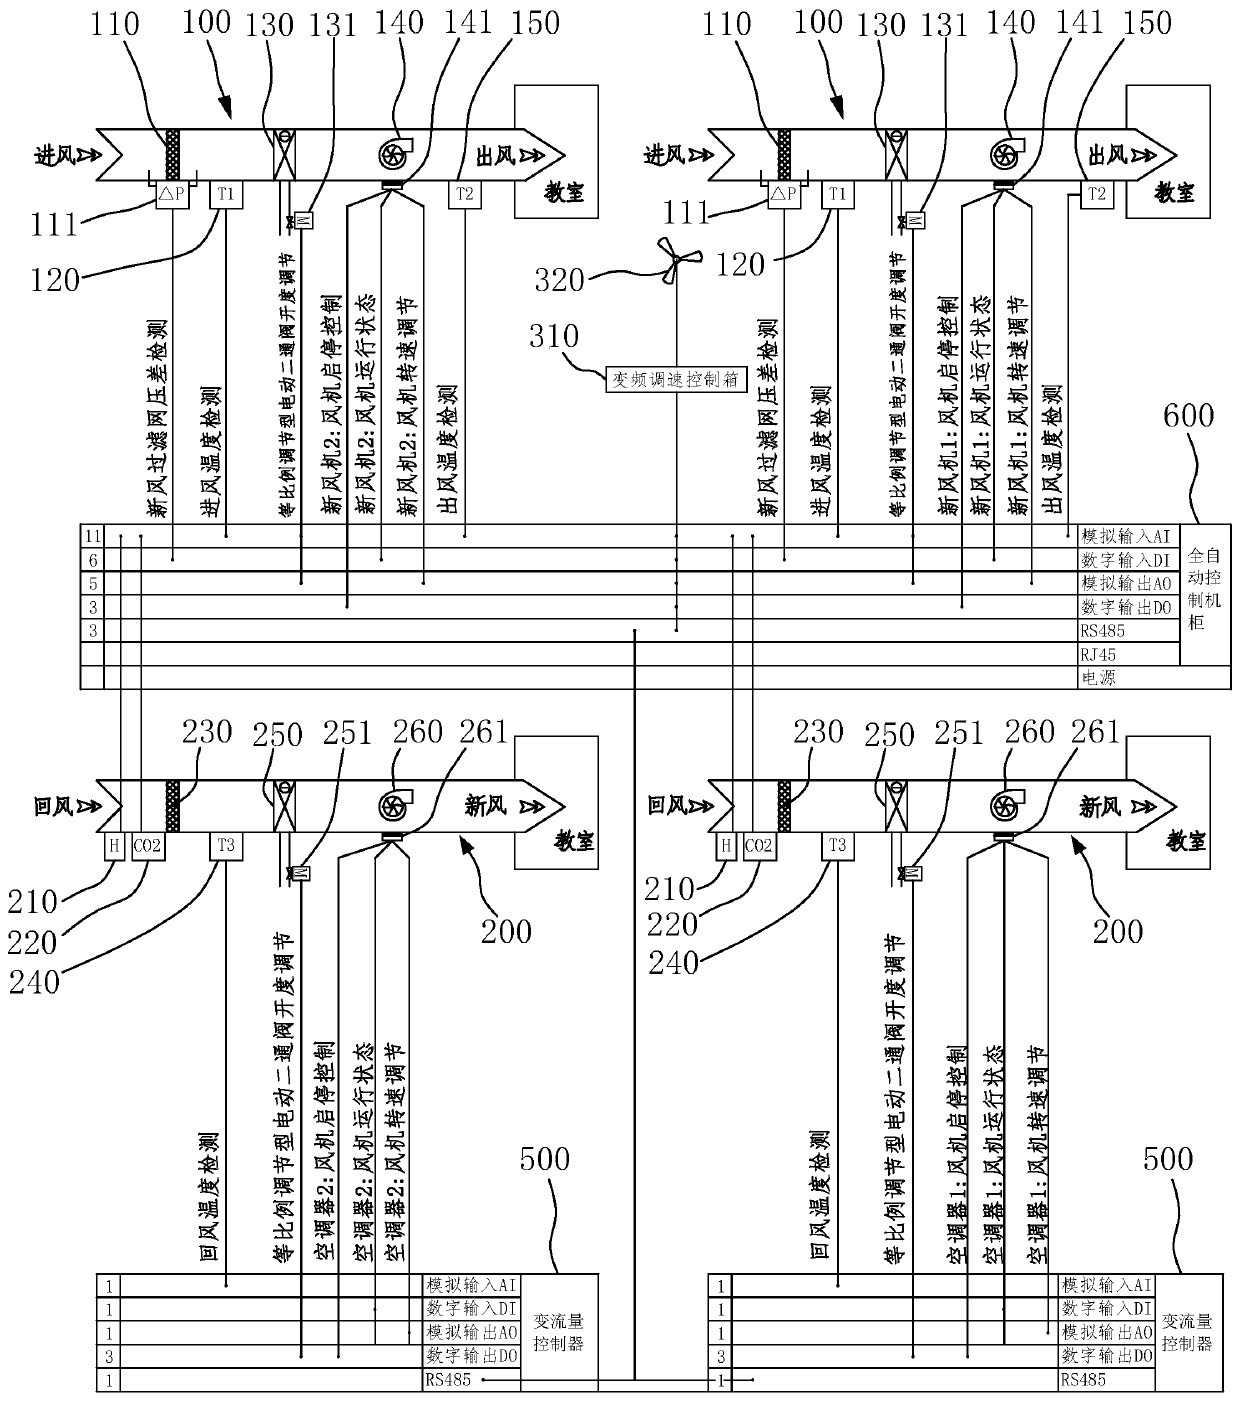 Automatic optimization energy-saving control system based on human body thermal comfort level and people number optimization grouping